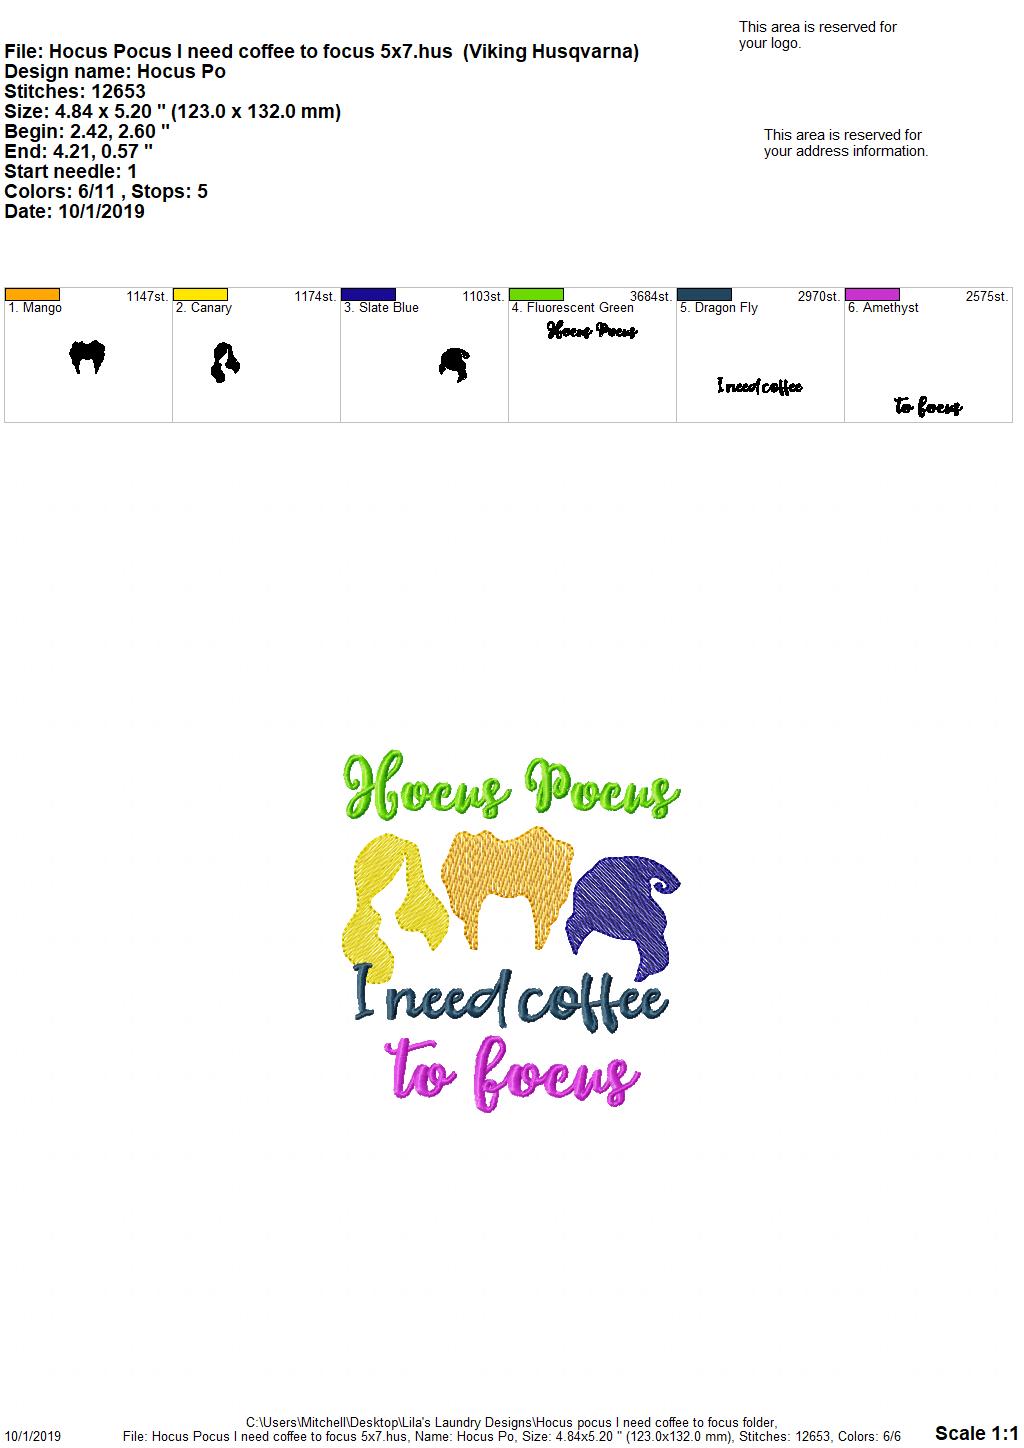 Hocus Pocus I need coffee to focus 4x4 and 5x7 - digital embroidery design